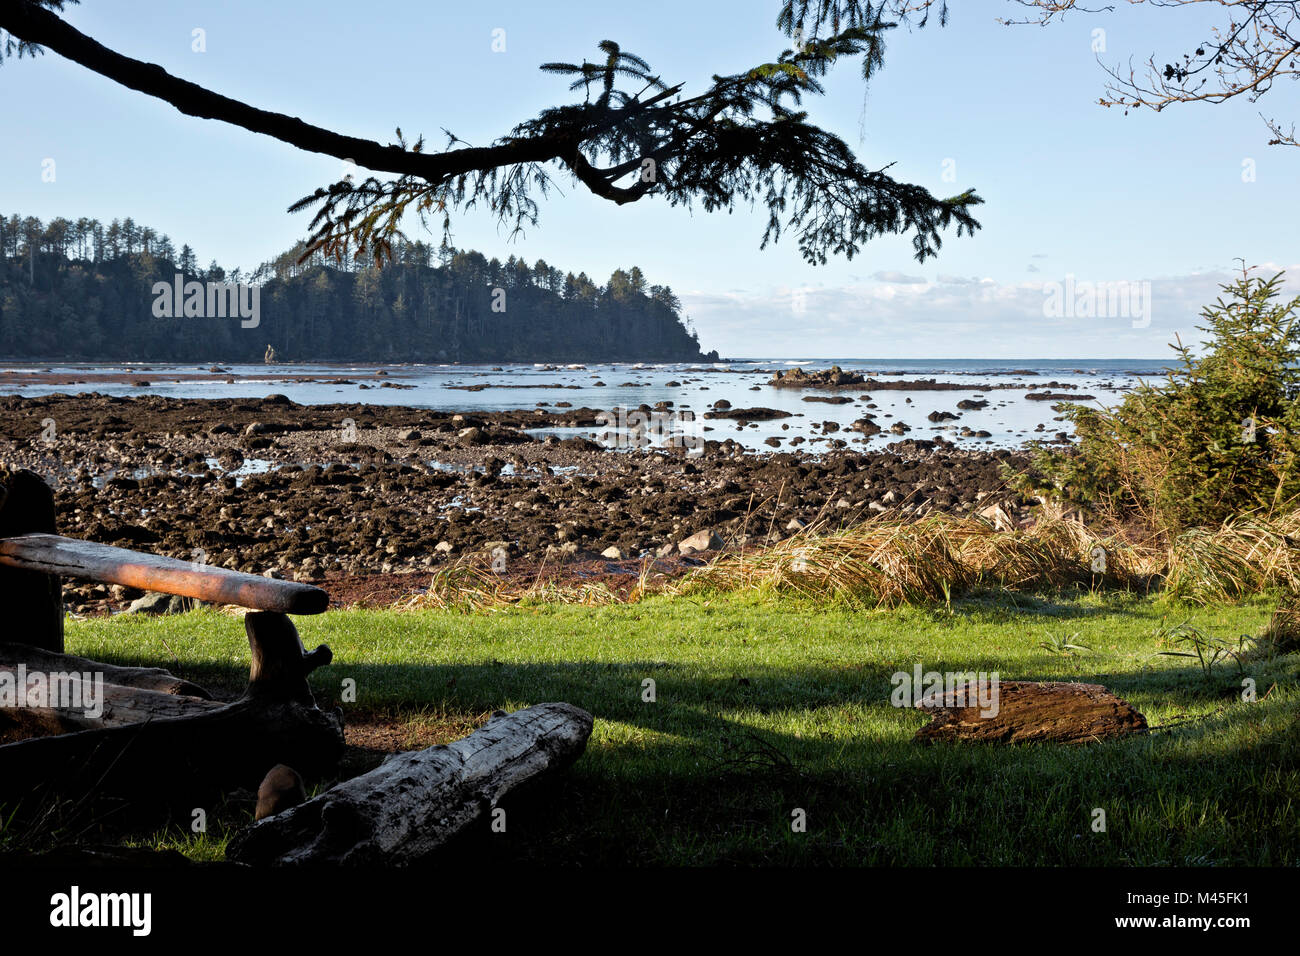 WA13437-00...WASHINGTON - Grassy backcountry campsite overlooking the Pacific Ocean at Cape Alava in Olympic National Park. Stock Photo